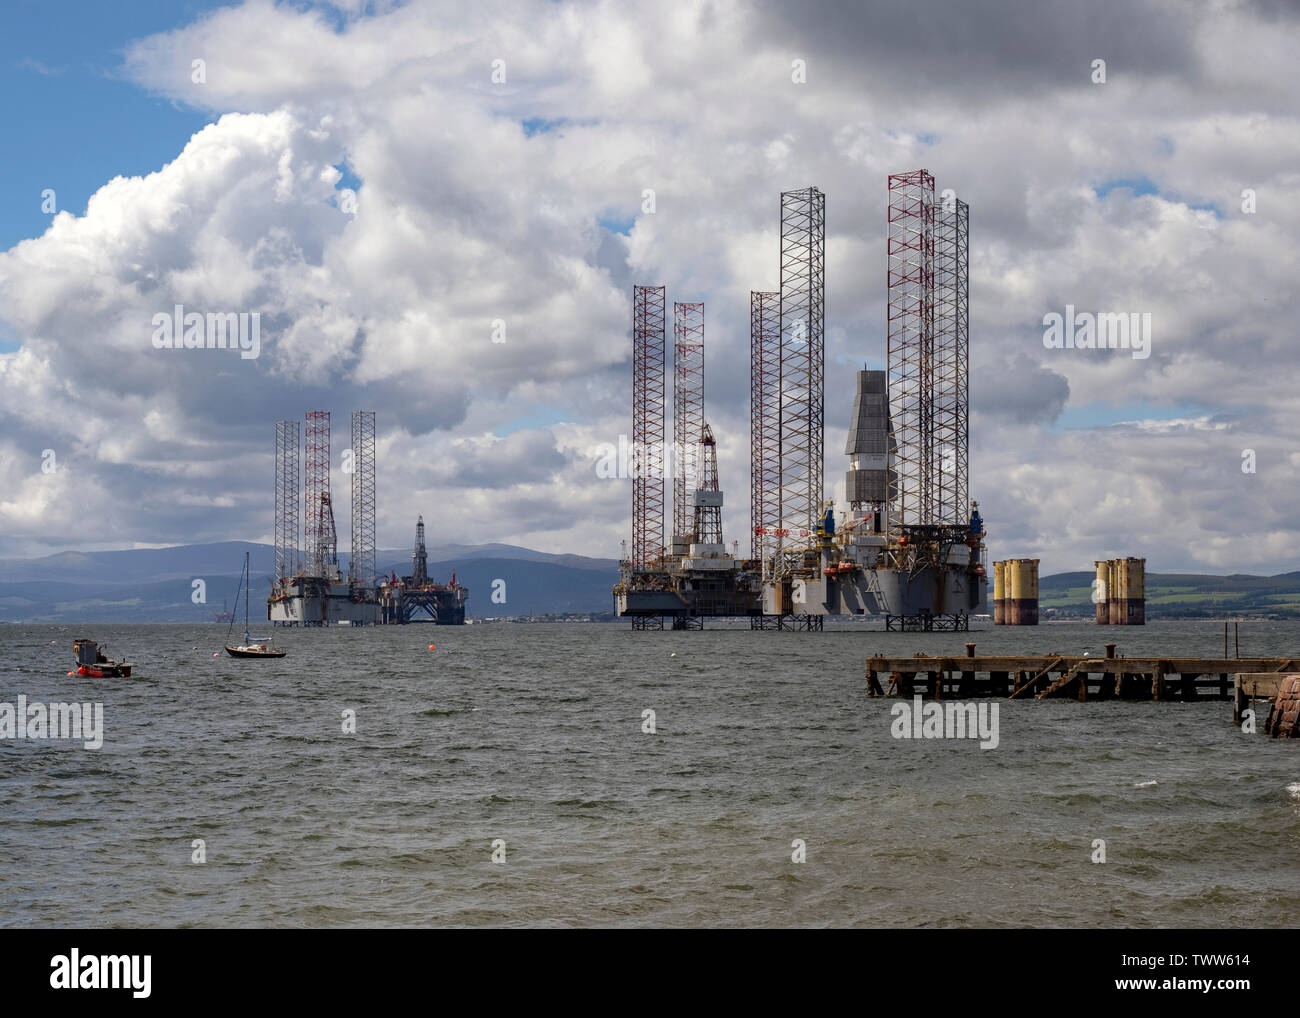 Oil Rigs and Drilling Platforms in the Cromarty Firth, Ross and Cromarty, Scotland, UK. Stock Photo